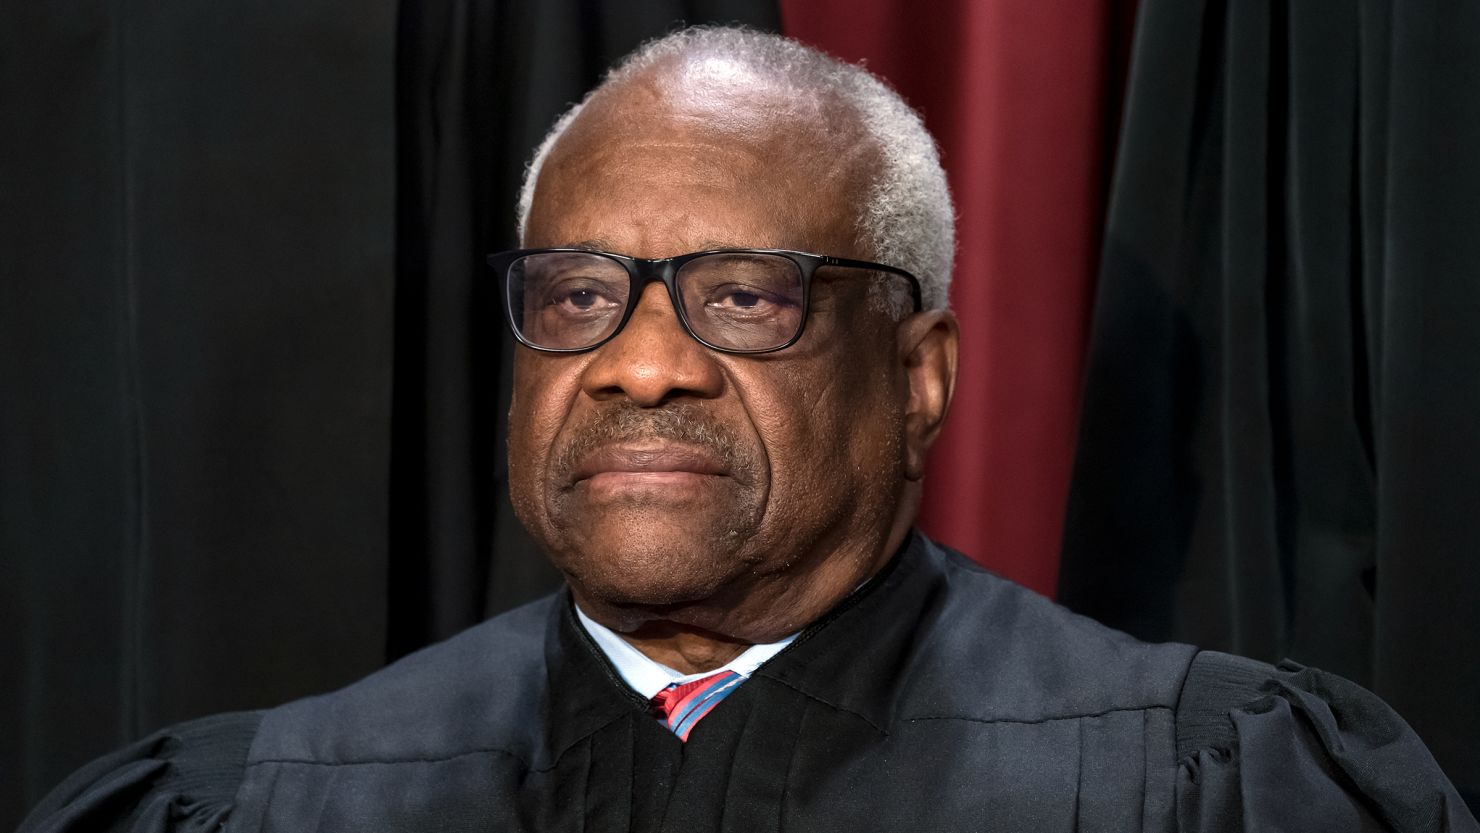 Associate Justice Clarence Thomas joins other members of the Supreme Court as they pose for a new group portrait, at the Supreme Court building in Washington, DC, in October 2022.